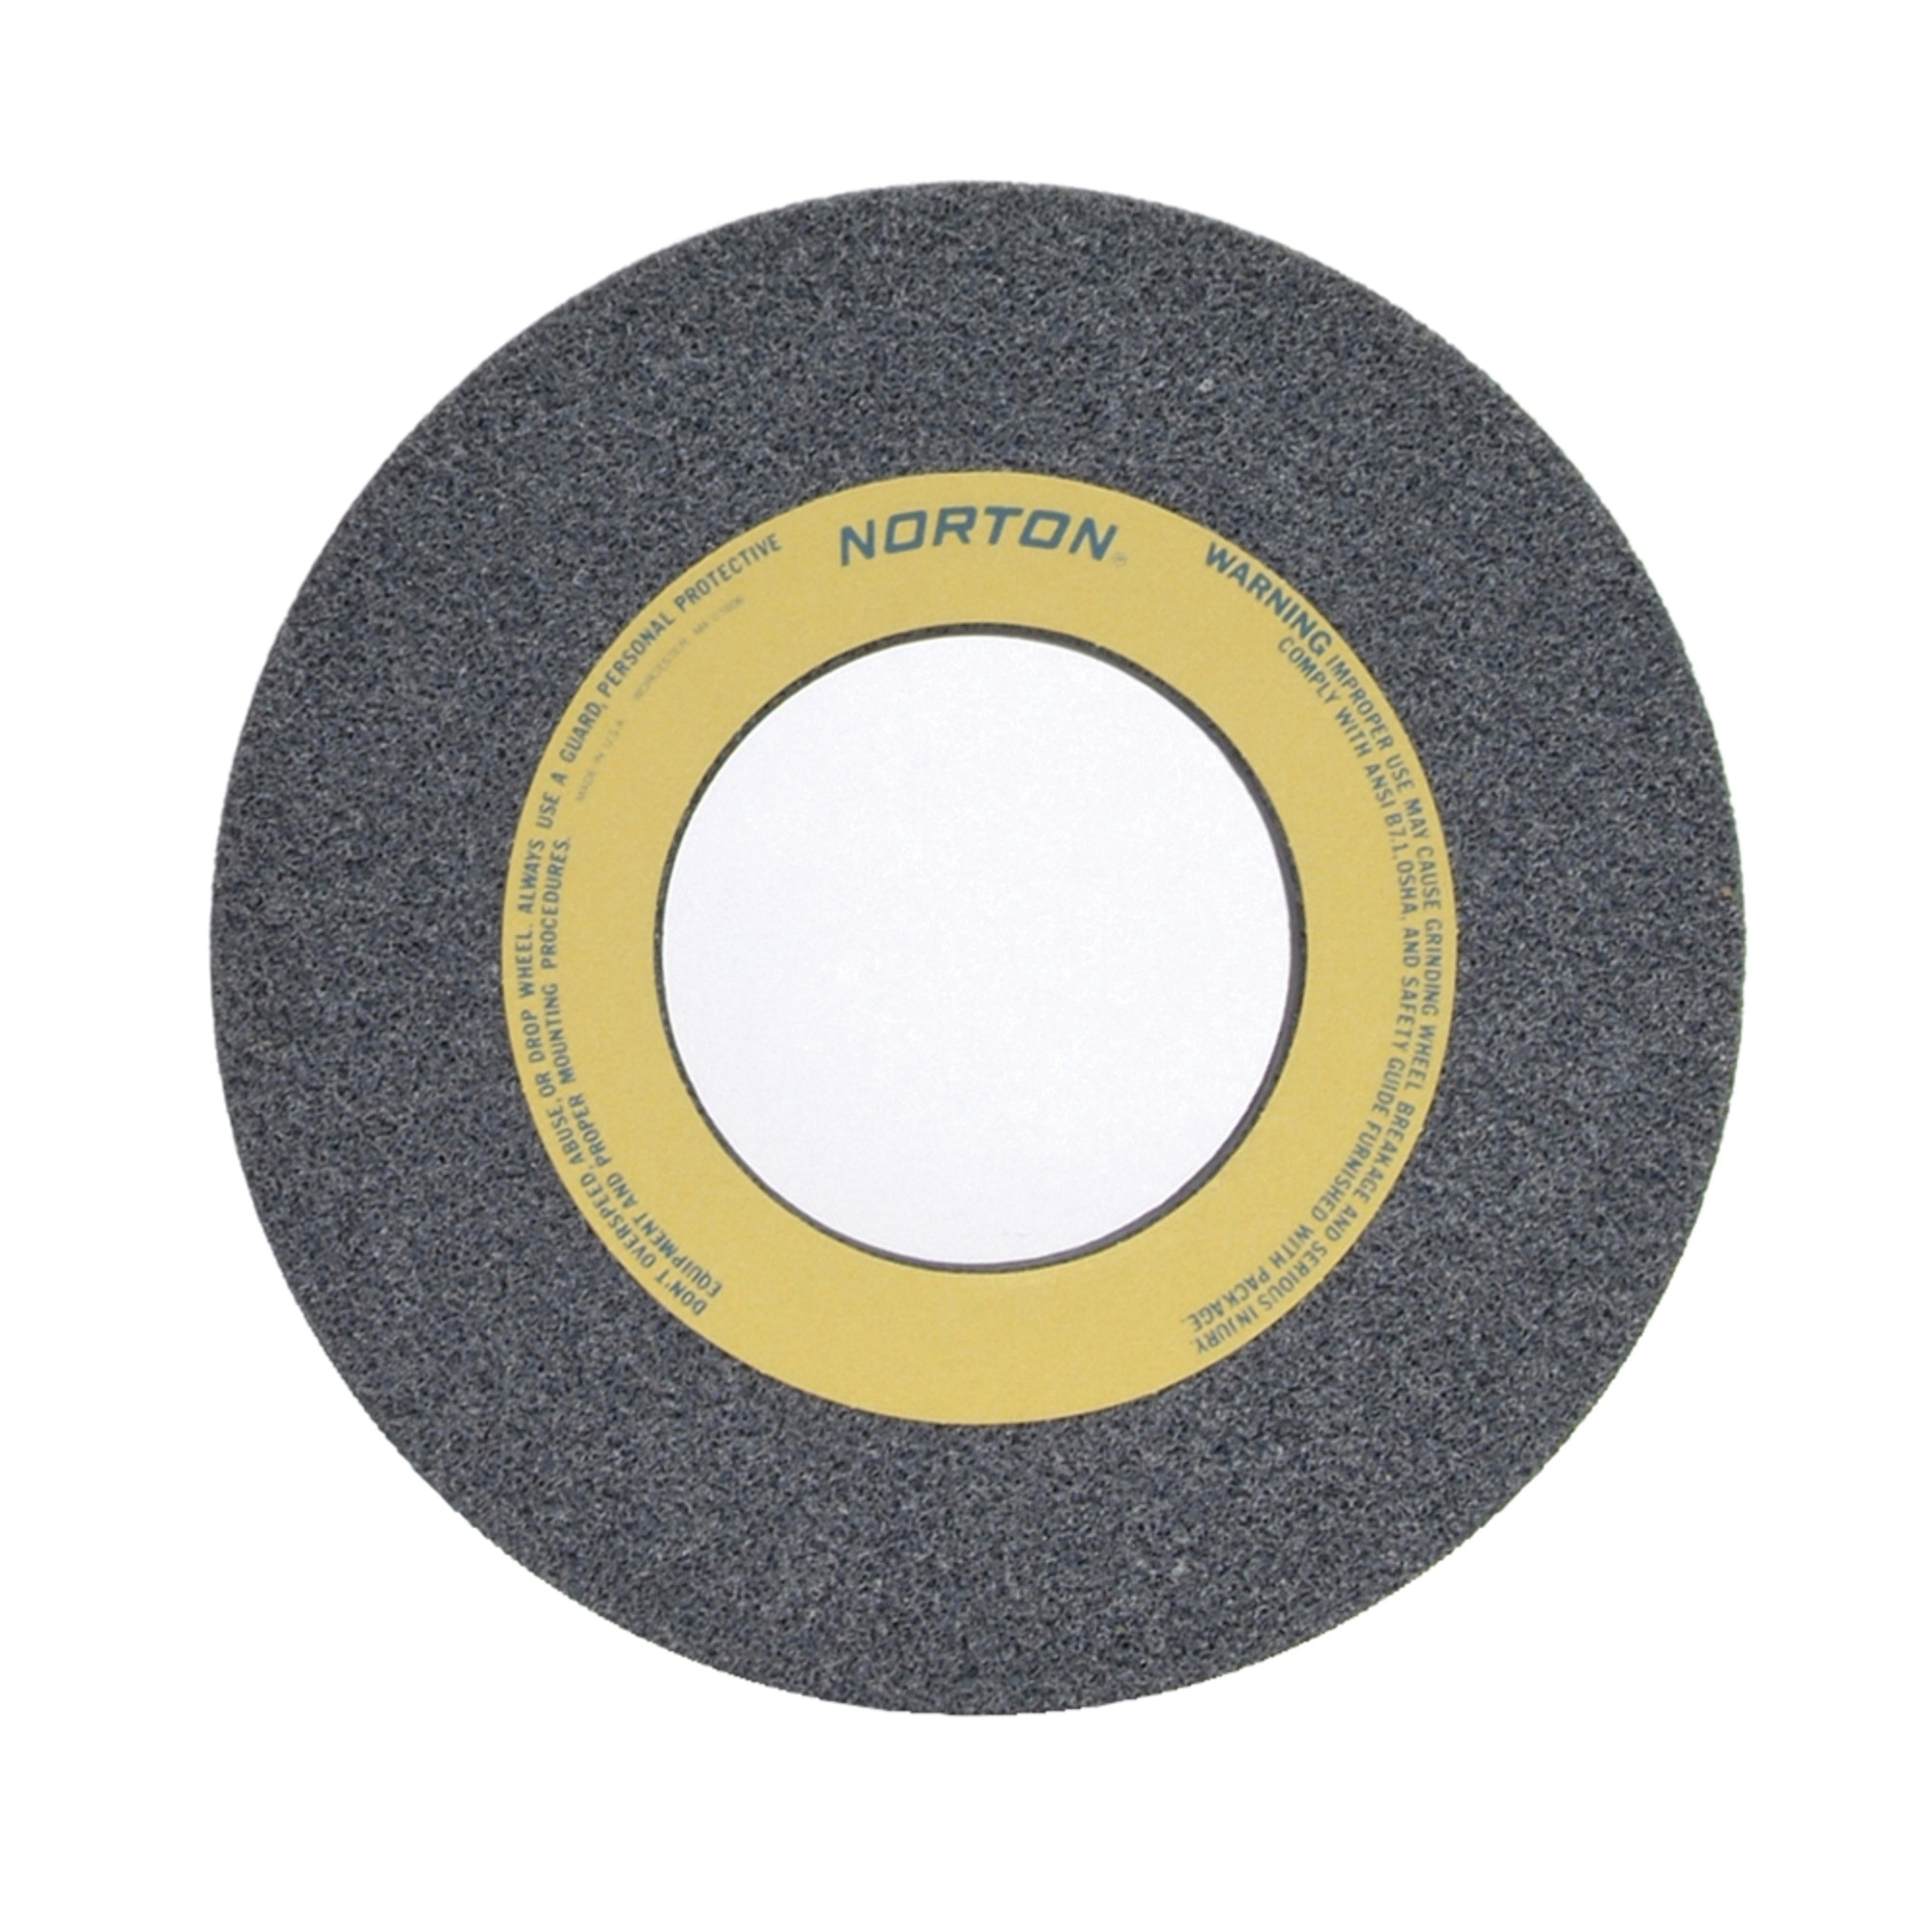 Norton® 66253263128 32A Straight Toolroom Wheel, 12 in Dia x 1-1/2 in THK, 5 in Center Hole, 46 Grit, Aluminum Oxide Abrasive